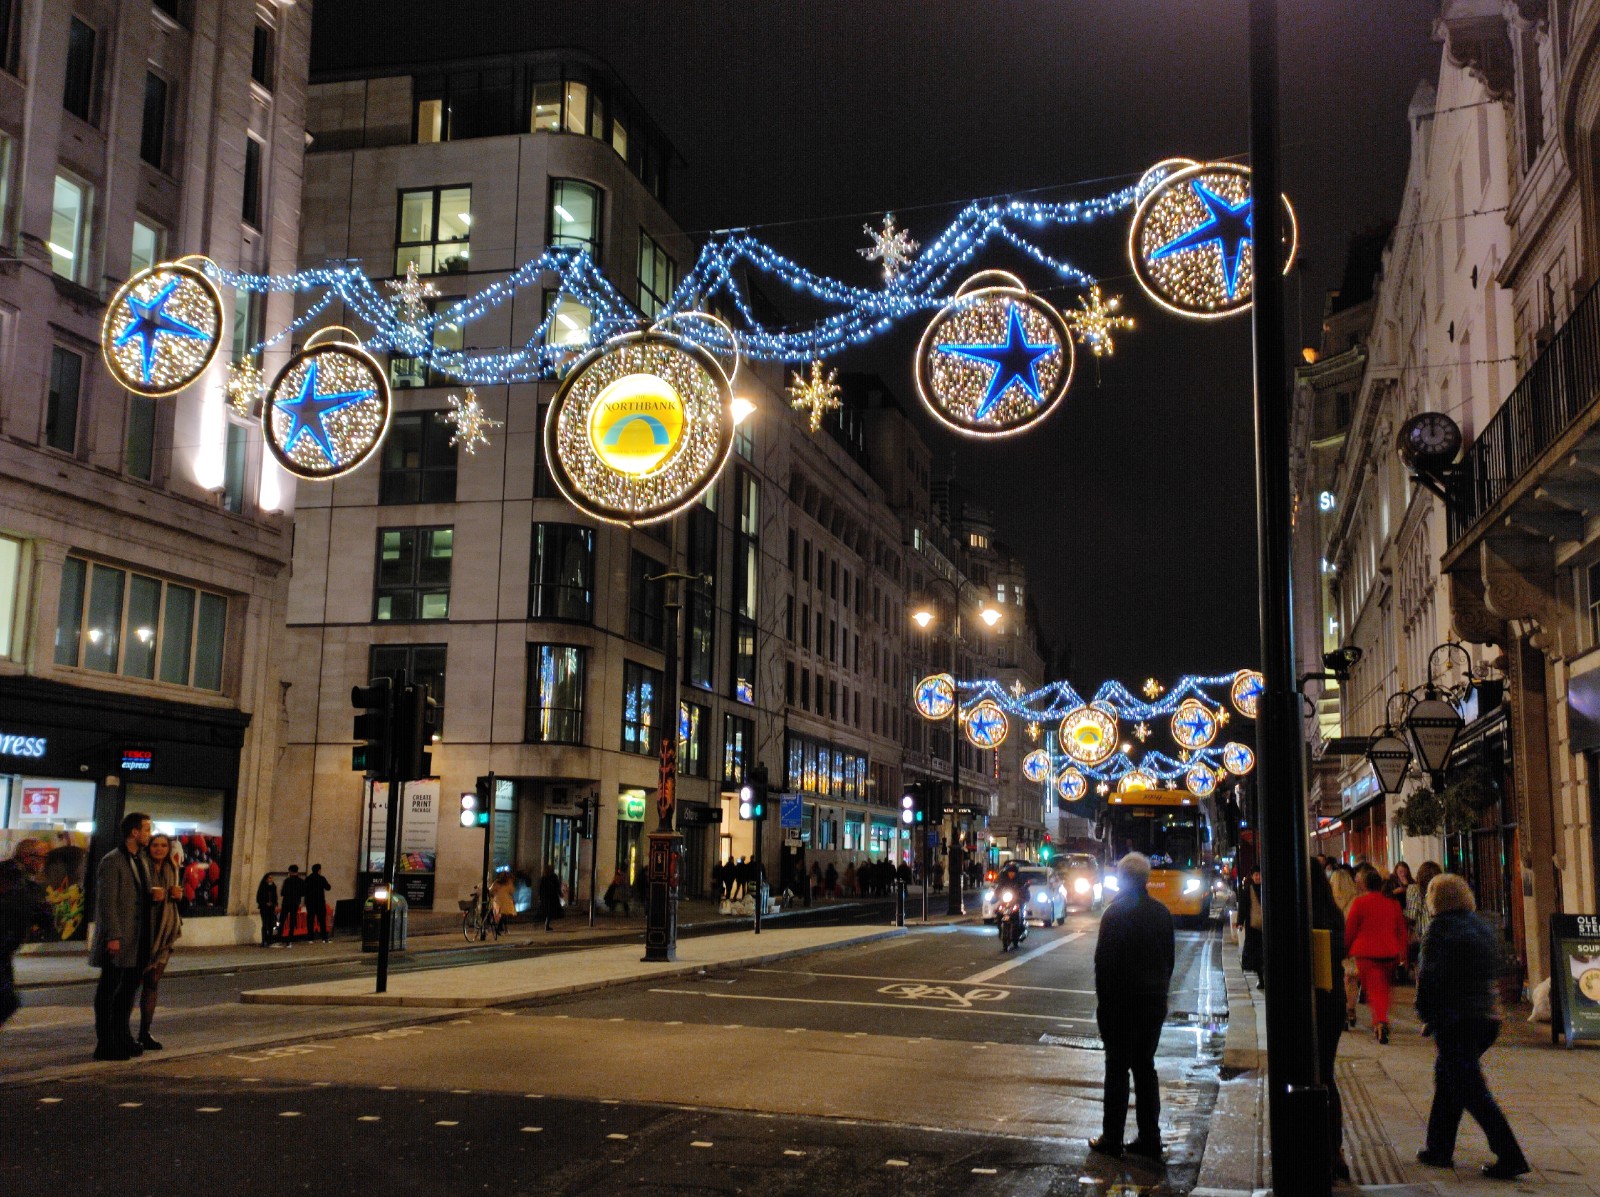 6 Tips to Make the Most of Your Winter in London as an International Student